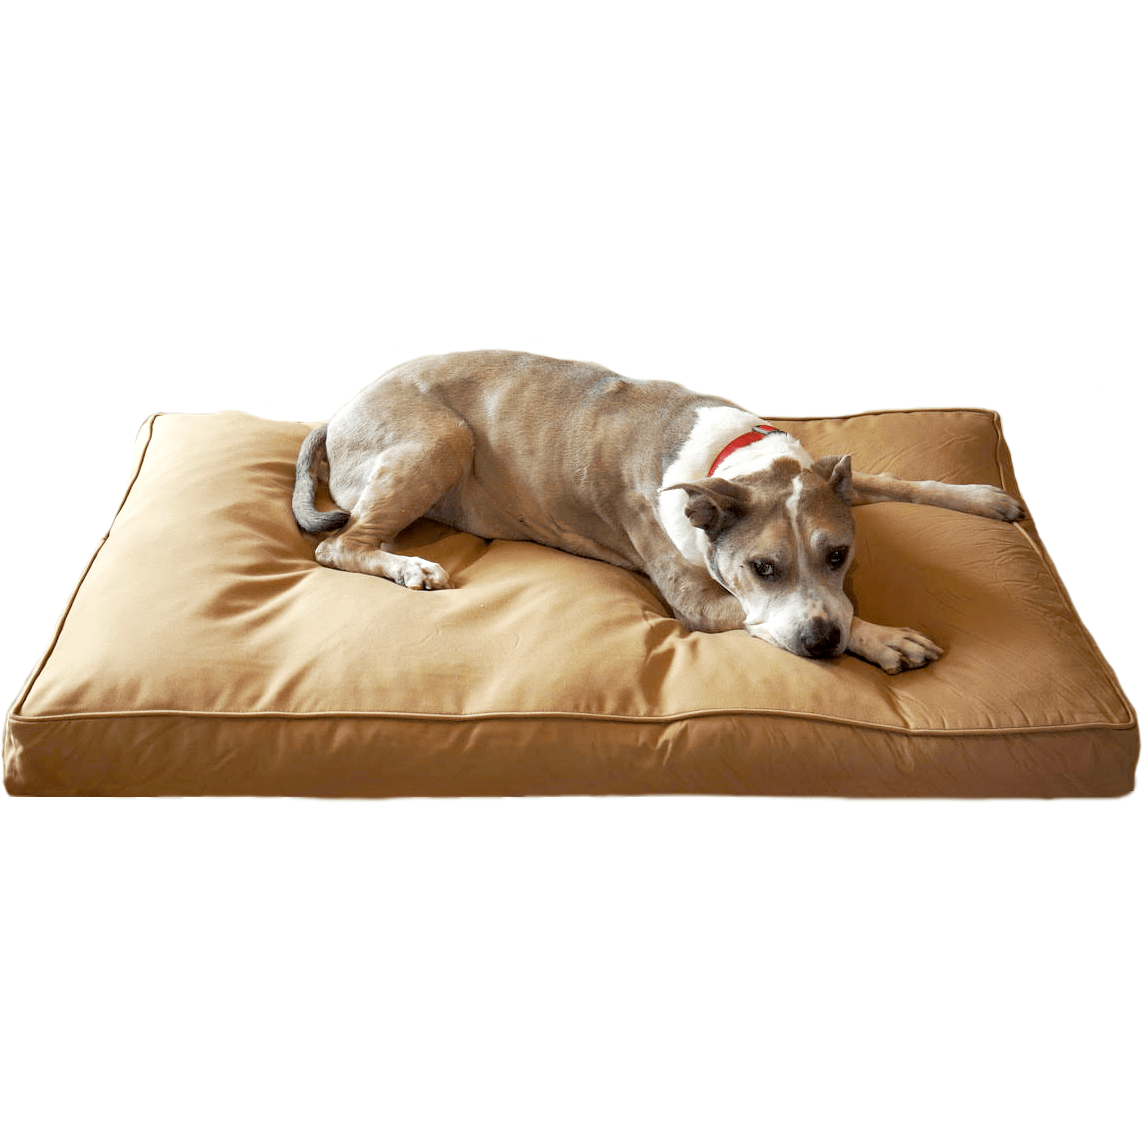 Durable & Water Resistant Crate Mat, (34 x 20) Dog Bed - Perfect